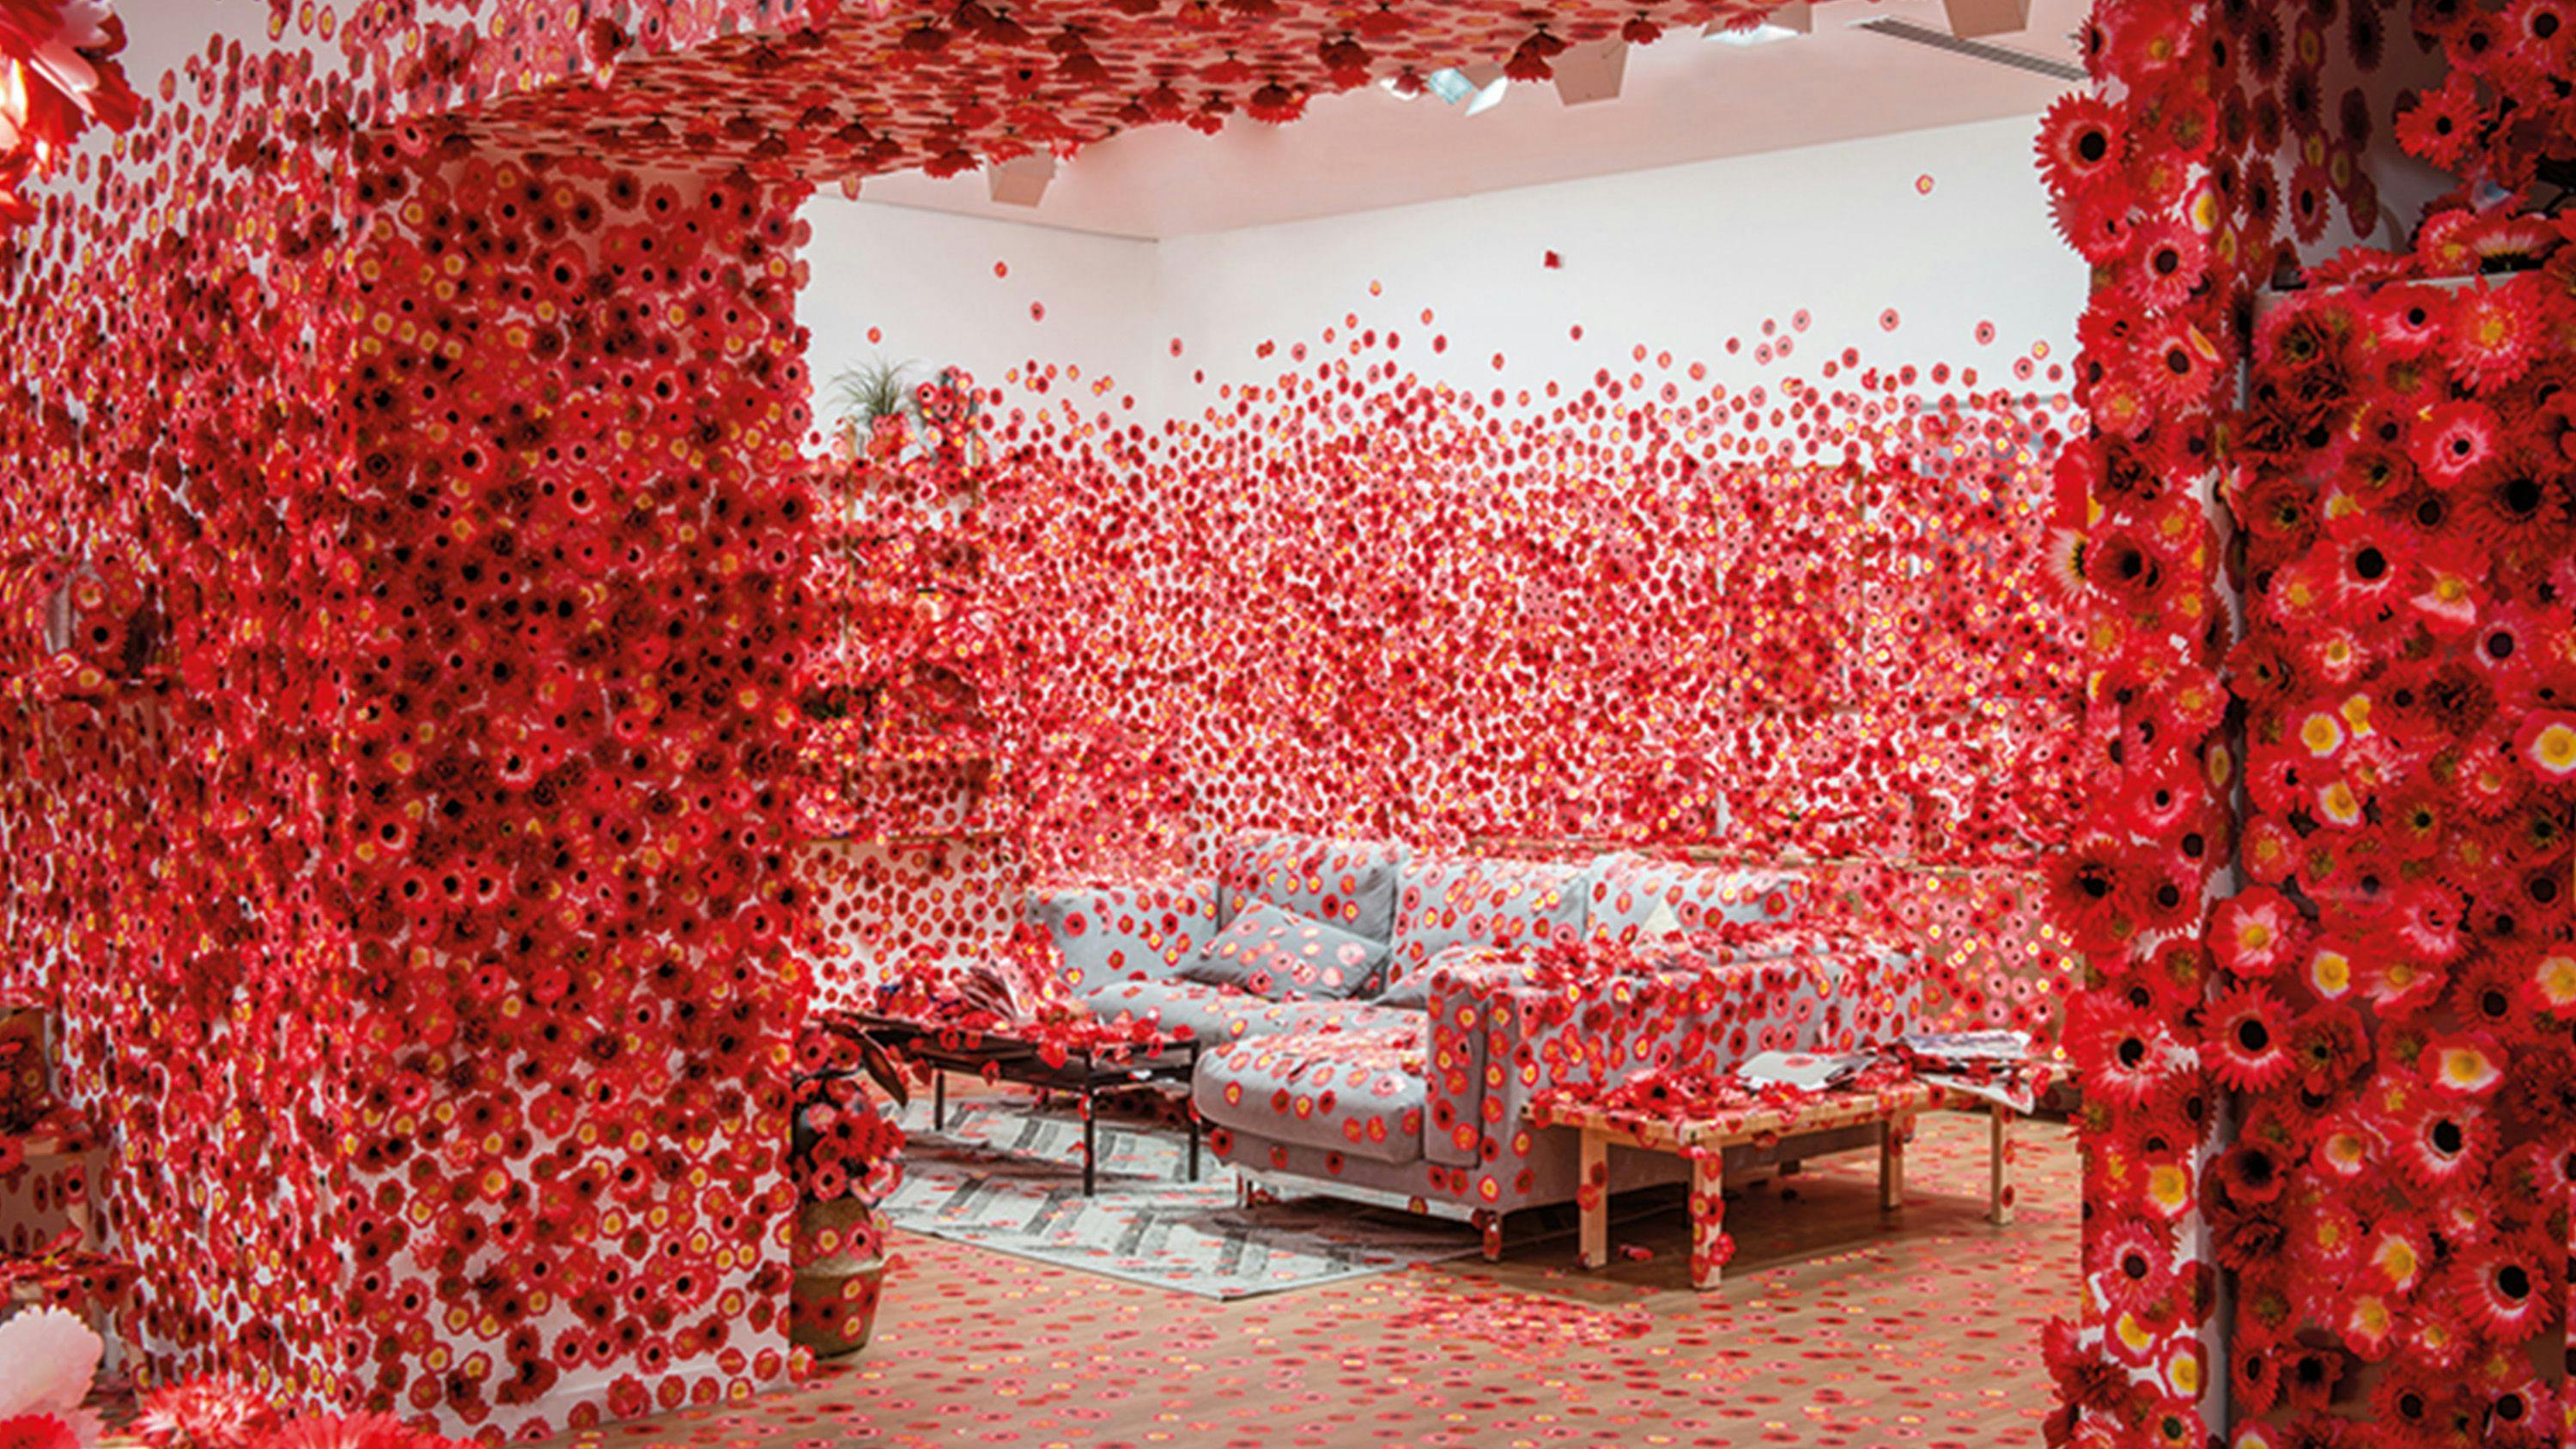 Installation view of Yayoi Kusama's exhibition "Flower Obsession," at NGV Triennial at the National Gallery of Victoria, Melbourne, dated 2017.